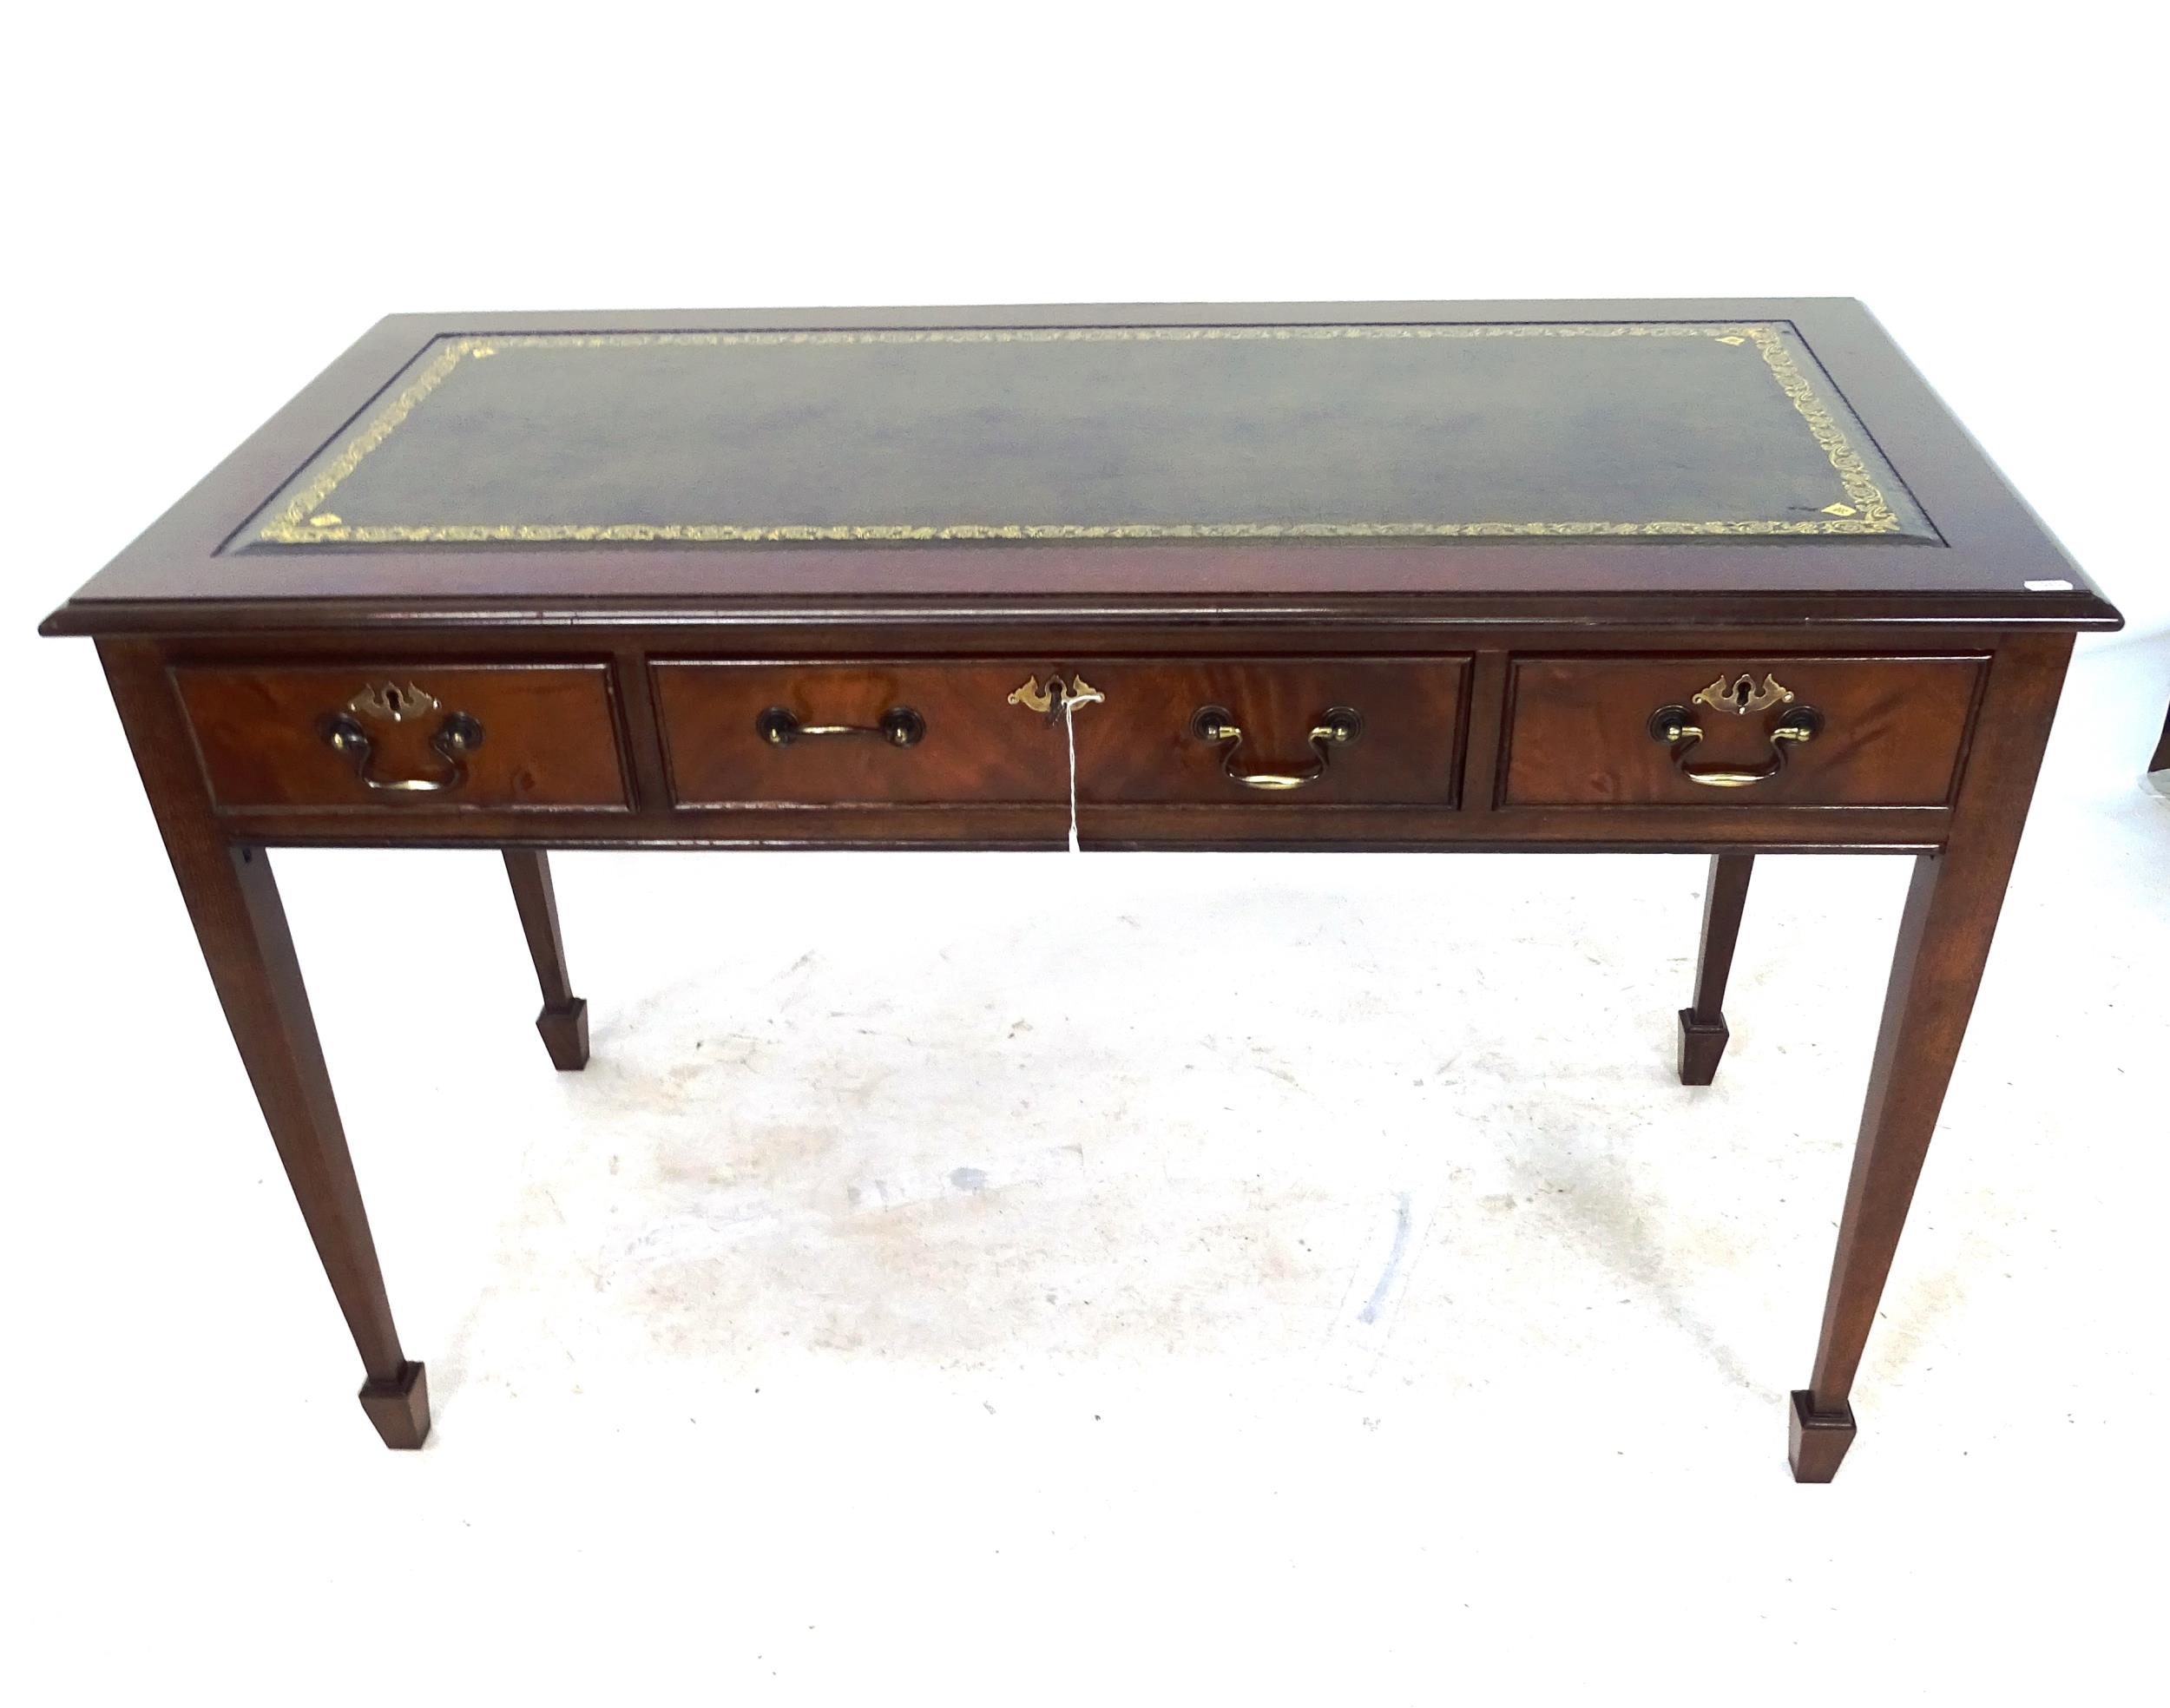 A reproduction mahogany writing table, with an inset green leather skiver, 3 frieze drawers, on